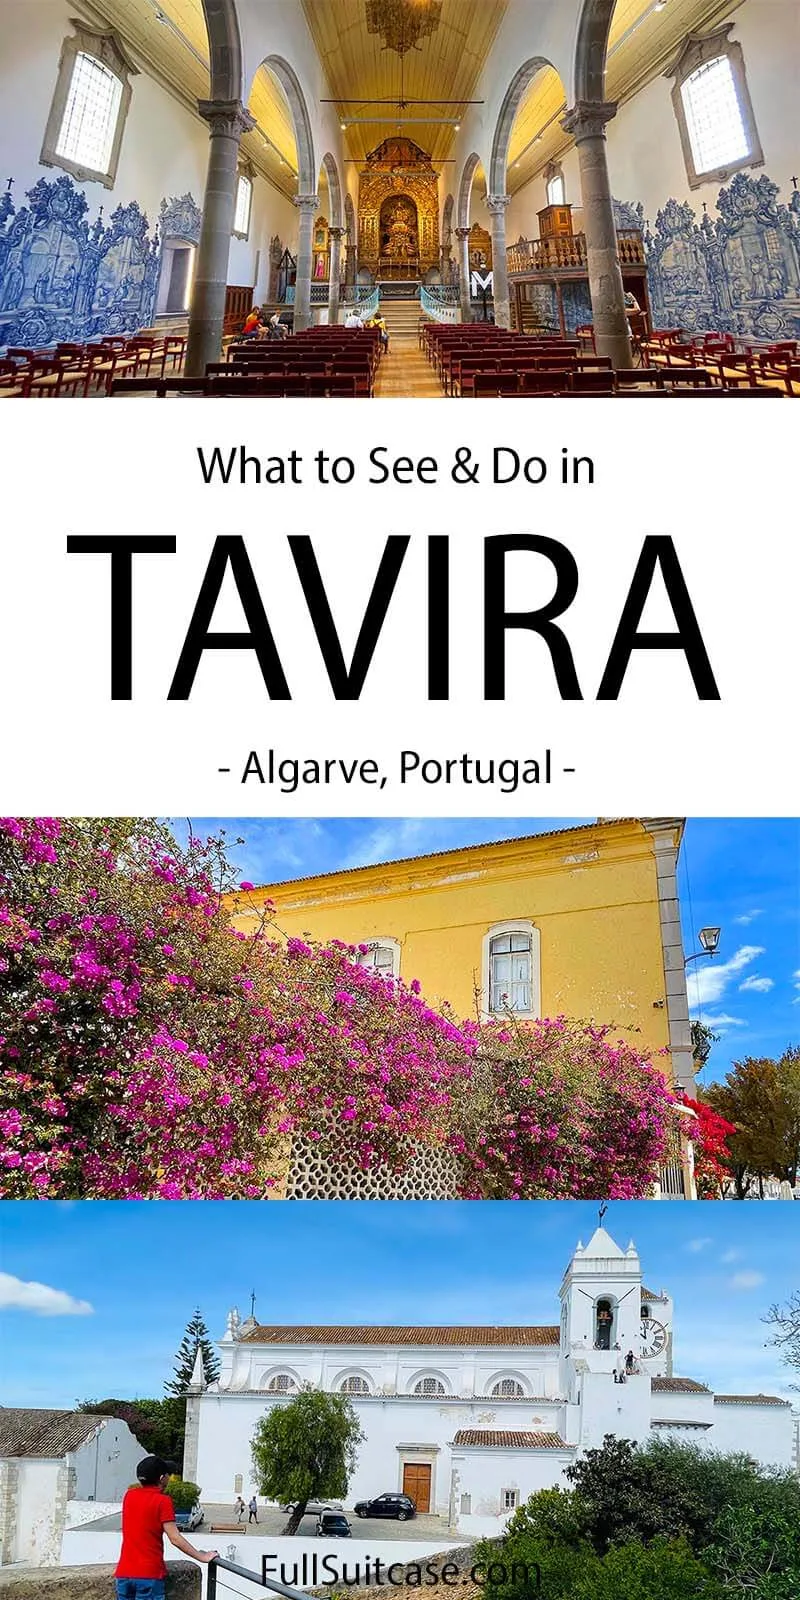 Tavira, Portugal - what to see and do on first visit